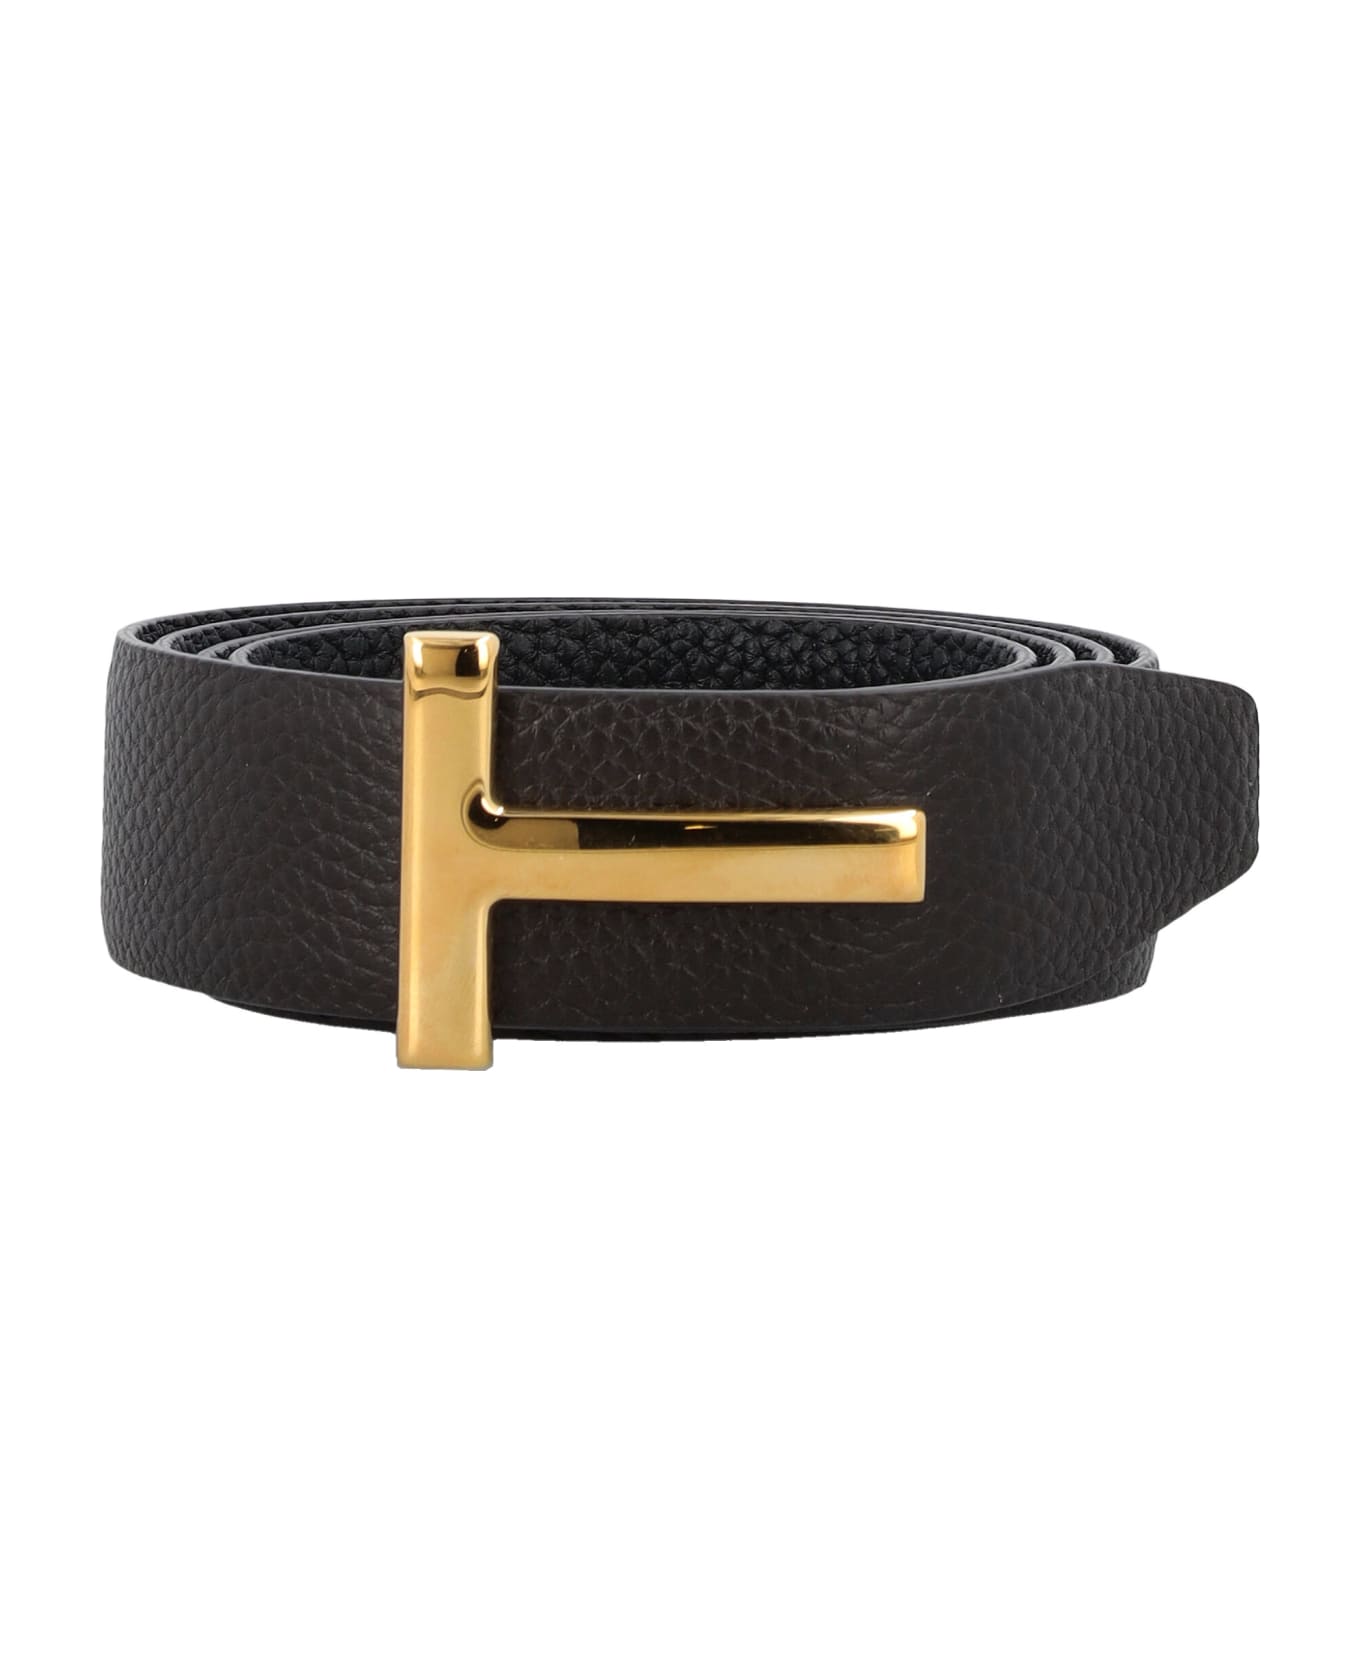 Tom Ford Small Grain Leather Icon Belt - BROWN BLACK